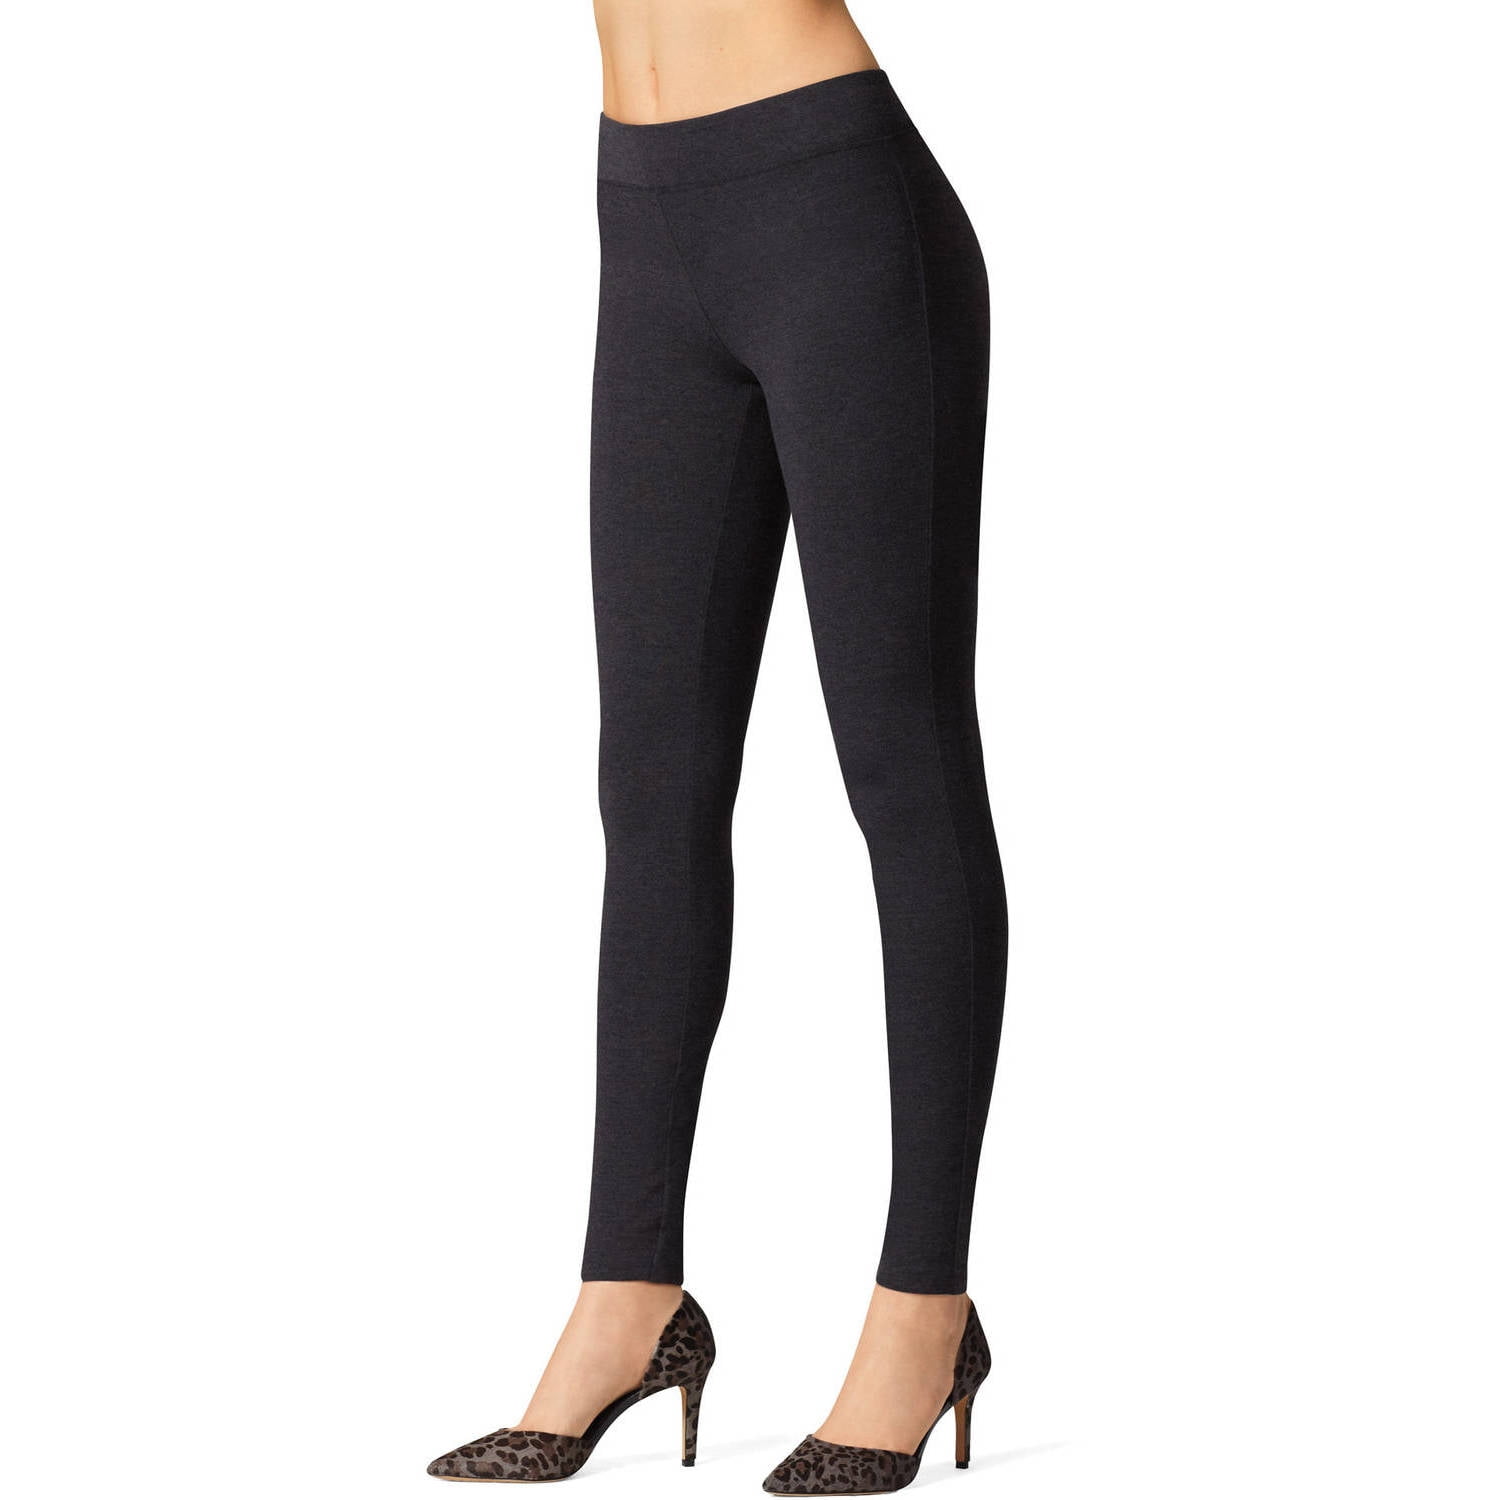 Hanes Women's Stretch Jersey Legging, Black, Small at